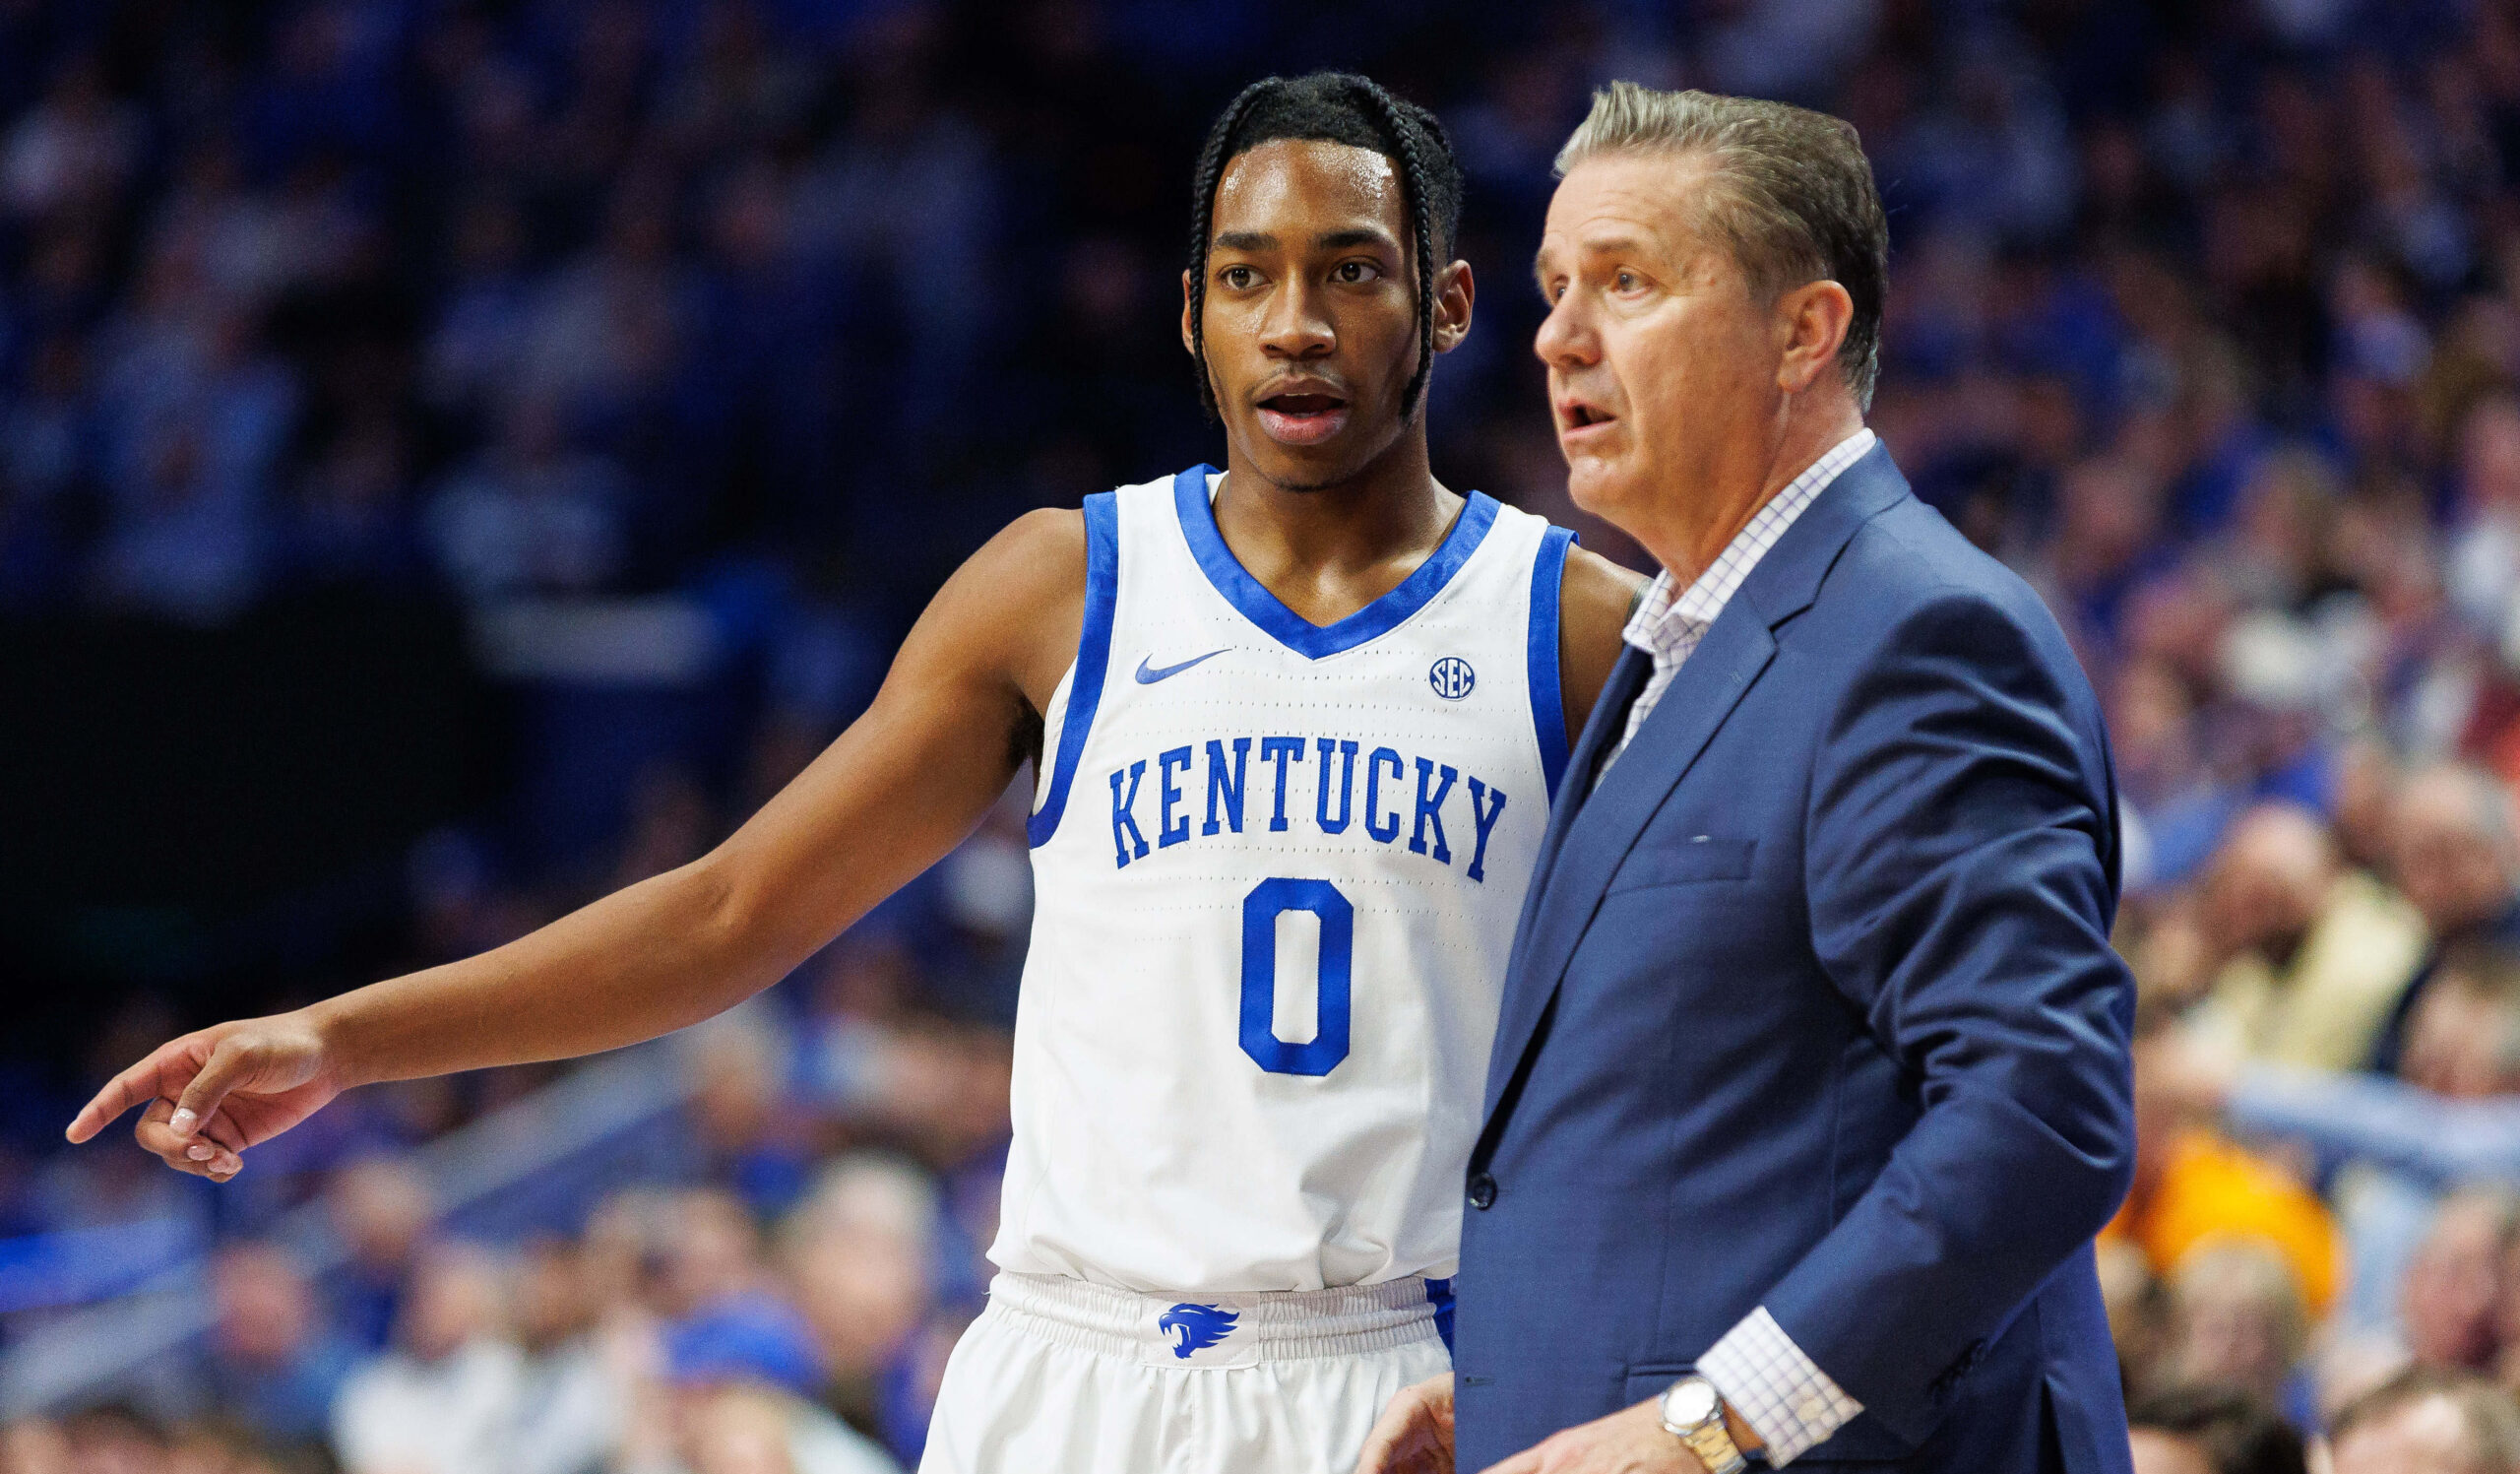 John Calipari Guards Drafted in Top 25 Hit Every Time, So Go Ahead and Doubt Rob Dillingham